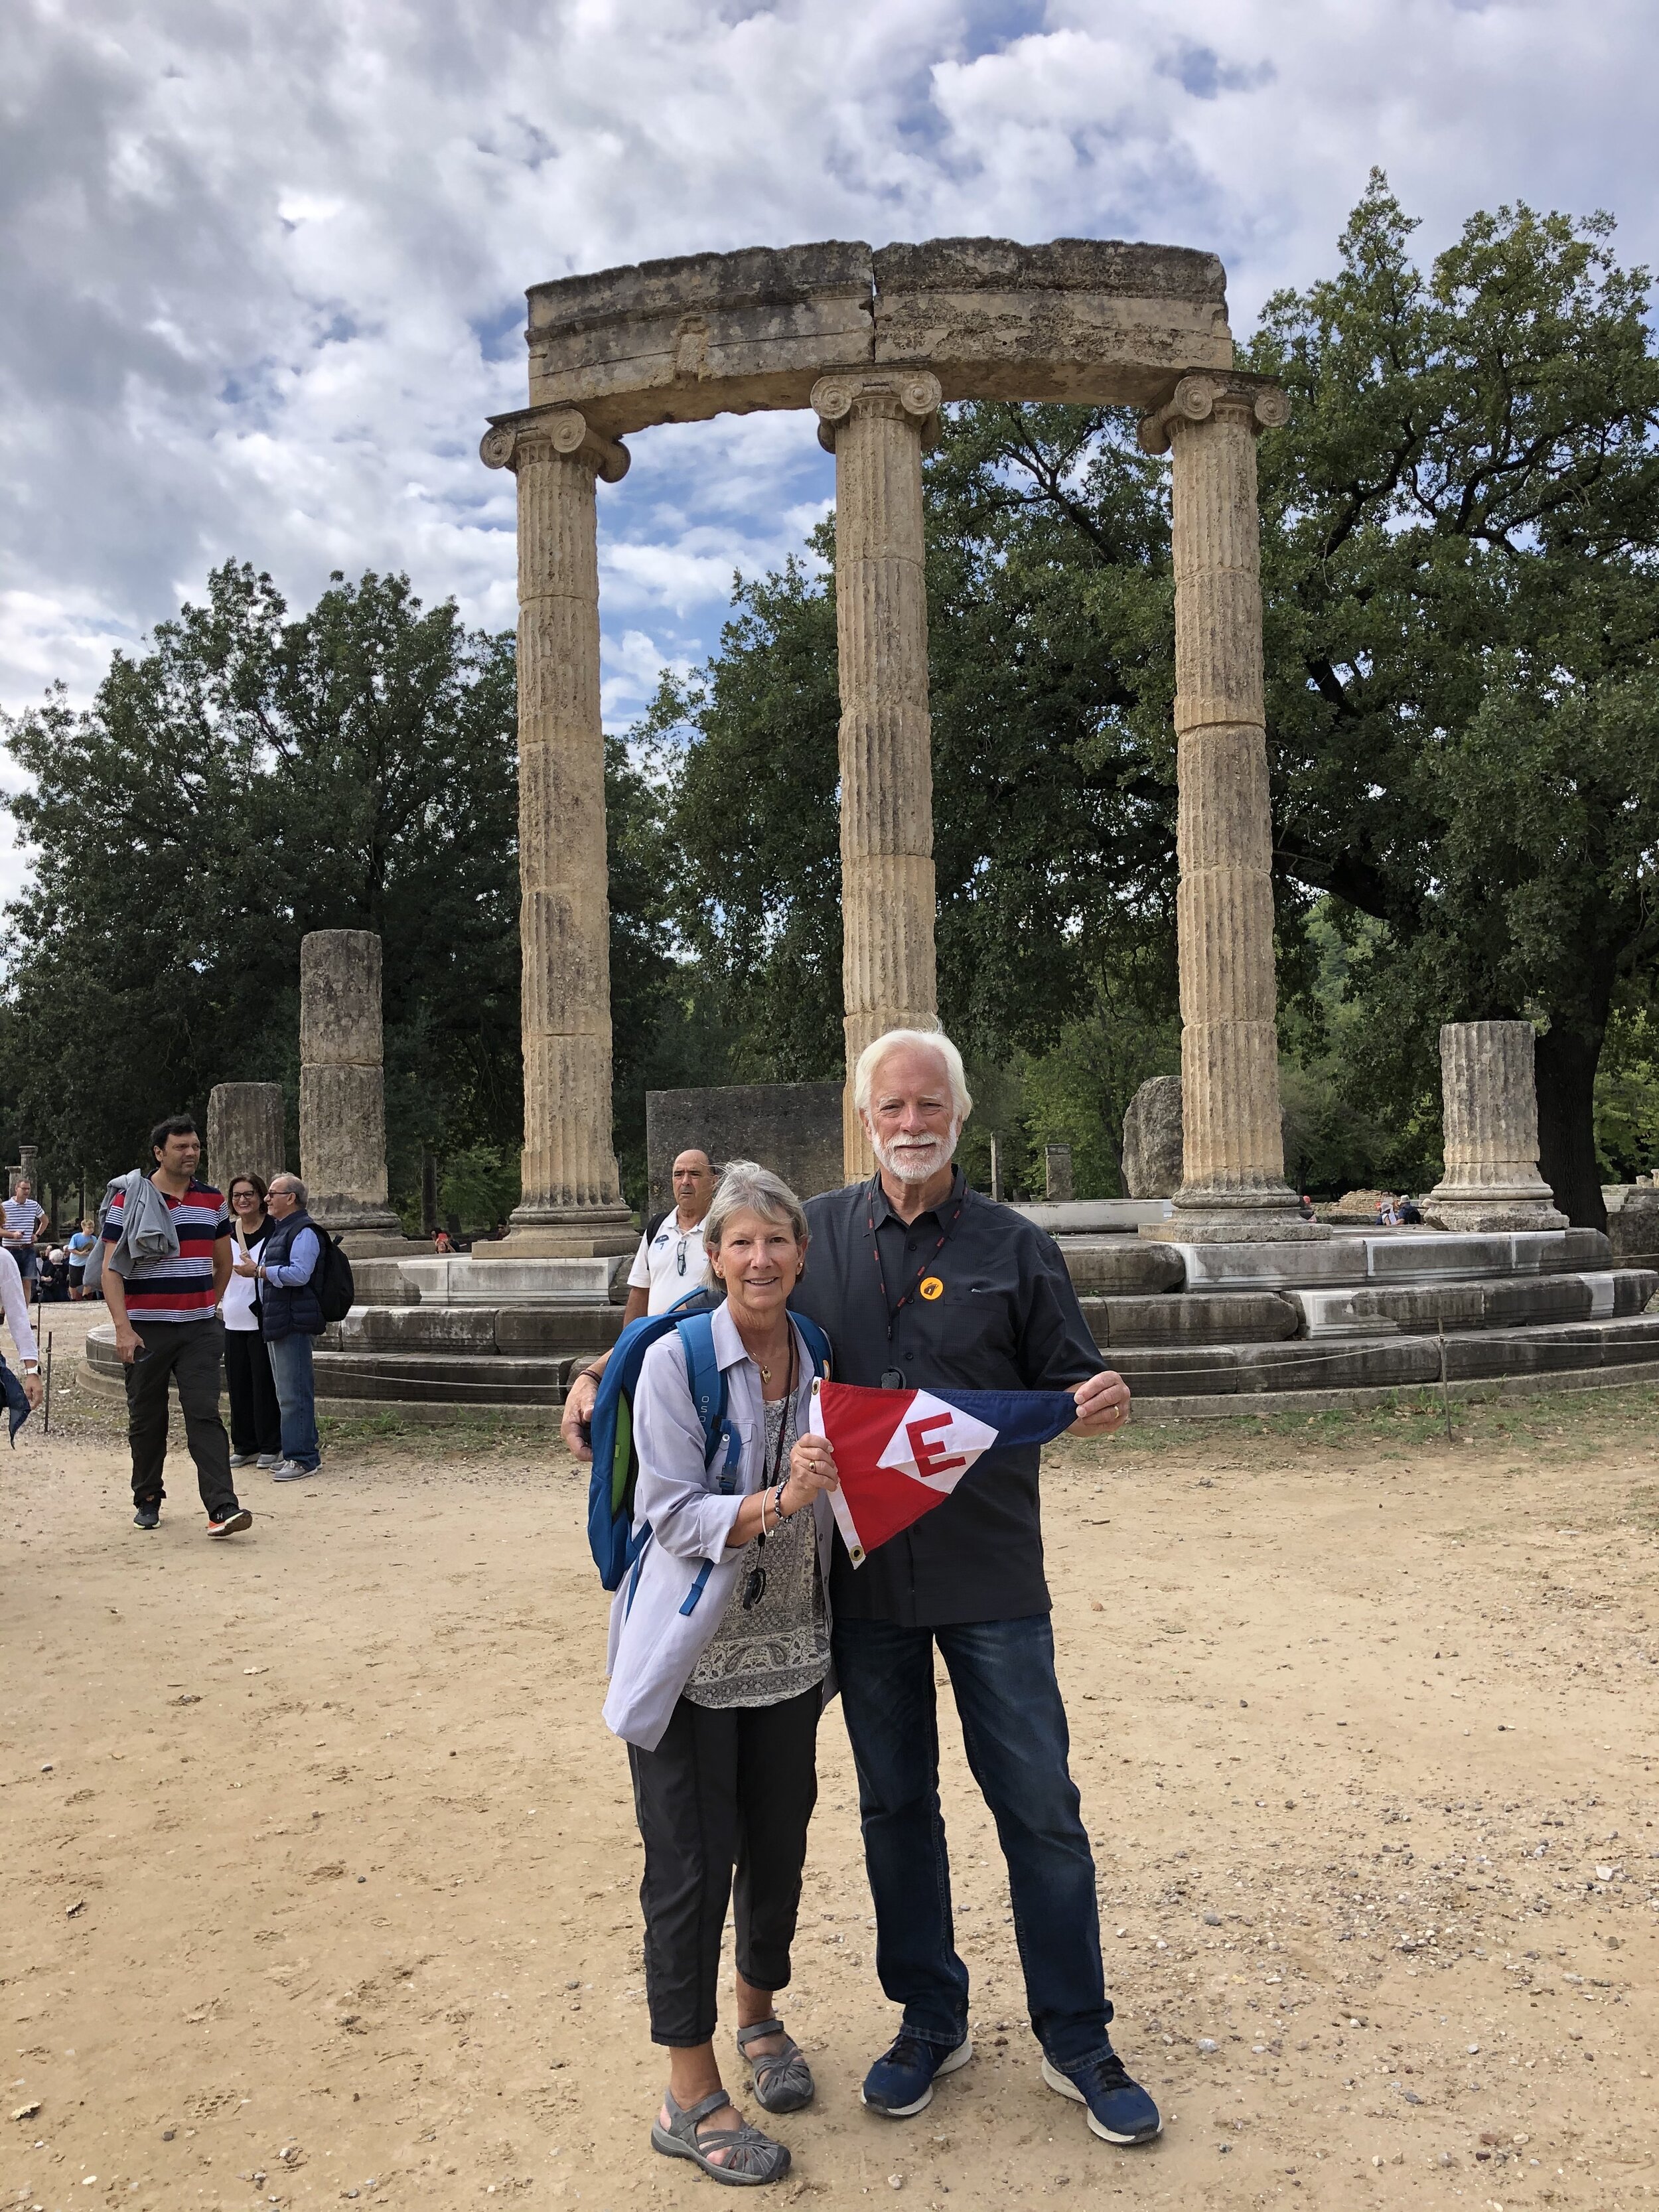  Chris and Ken show the colors in Olympia, Greece at the site of the first Olympic games 